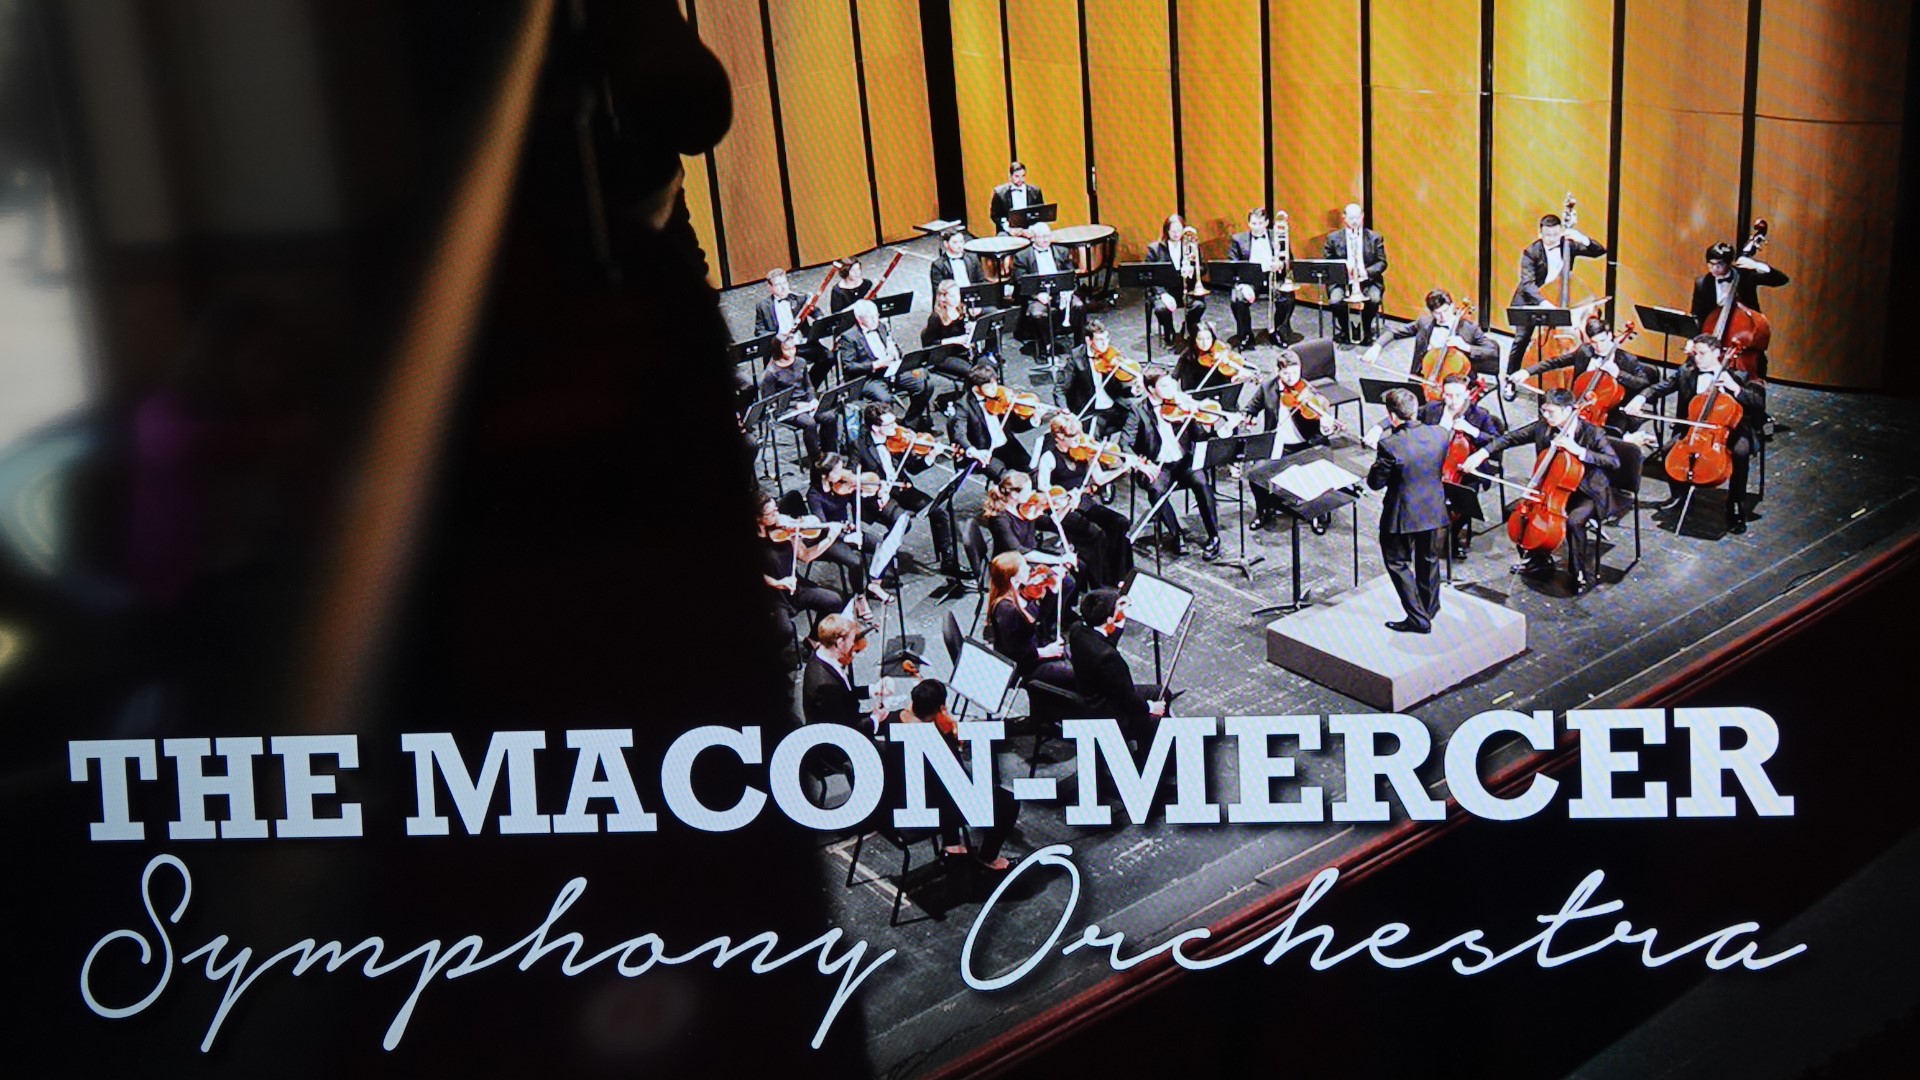 The Macon-Mercer Symphony Orchestra is made up of 26 students in the McDuffie Center for Strings Ensemble and principle members of the Atlanta Symphony Orchestra